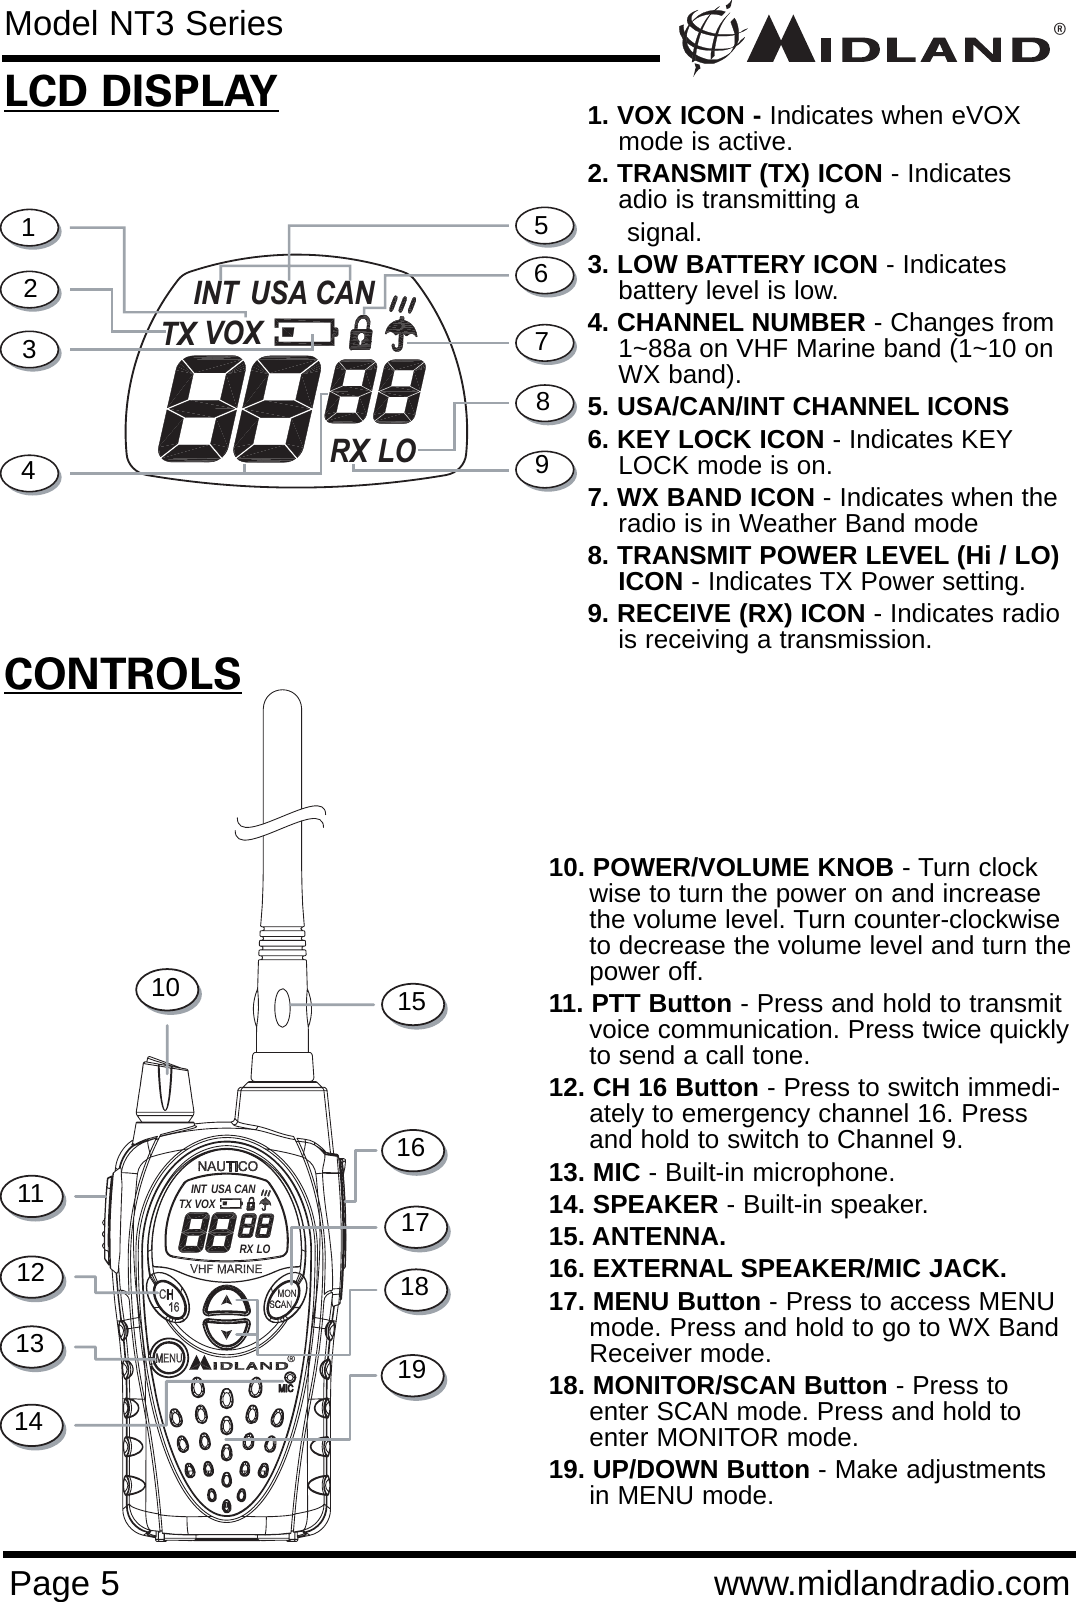 ®Page 5 www.midlandradio.comModel NT3 SeriesRX LOINT USA CANTX VOXCONTROLSRX LOINT USA CANTX VOXLCD DISPLAY1. VOX ICON - Indicates when eVOX mode is active.2. TRANSMIT (TX) ICON - Indicates adio is transmitting asignal.3. LOW BATTERY ICON - Indicates   battery level is low.4. CHANNEL NUMBER - Changes from 1~88a on VHF Marine band (1~10 on WX band).5. USA/CAN/INT CHANNEL ICONS6. KEY LOCK ICON - Indicates KEYLOCK mode is on.7. WX BAND ICON - Indicates when the radio is in Weather Band mode 8. TRANSMIT POWER LEVEL (Hi / LO) ICON - Indicates TX Power setting.9. RECEIVE (RX) ICON - Indicates radio is receiving a transmission.10. POWER/VOLUME KNOB - Turn clockwise to turn the power on and increase the volume level. Turn counter-clockwise to decrease the volume level and turn thepower off.11. PTT Button - Press and hold to transmit voice communication. Press twice quicklyto send a call tone.12. CH 16 Button - Press to switch immedi-ately to emergency channel 16. Press and hold to switch to Channel 9.13. MIC - Built-in microphone.14. SPEAKER - Built-in speaker.15. ANTENNA.16. EXTERNAL SPEAKER/MIC JACK.17. MENU Button - Press to access MENU mode. Press and hold to go to WX Band Receiver mode.18. MONITOR/SCAN Button - Press to enter SCAN mode. Press and hold to enter MONITOR mode.19. UP/DOWN Button - Make adjustments in MENU mode.12345678910111213141918171615